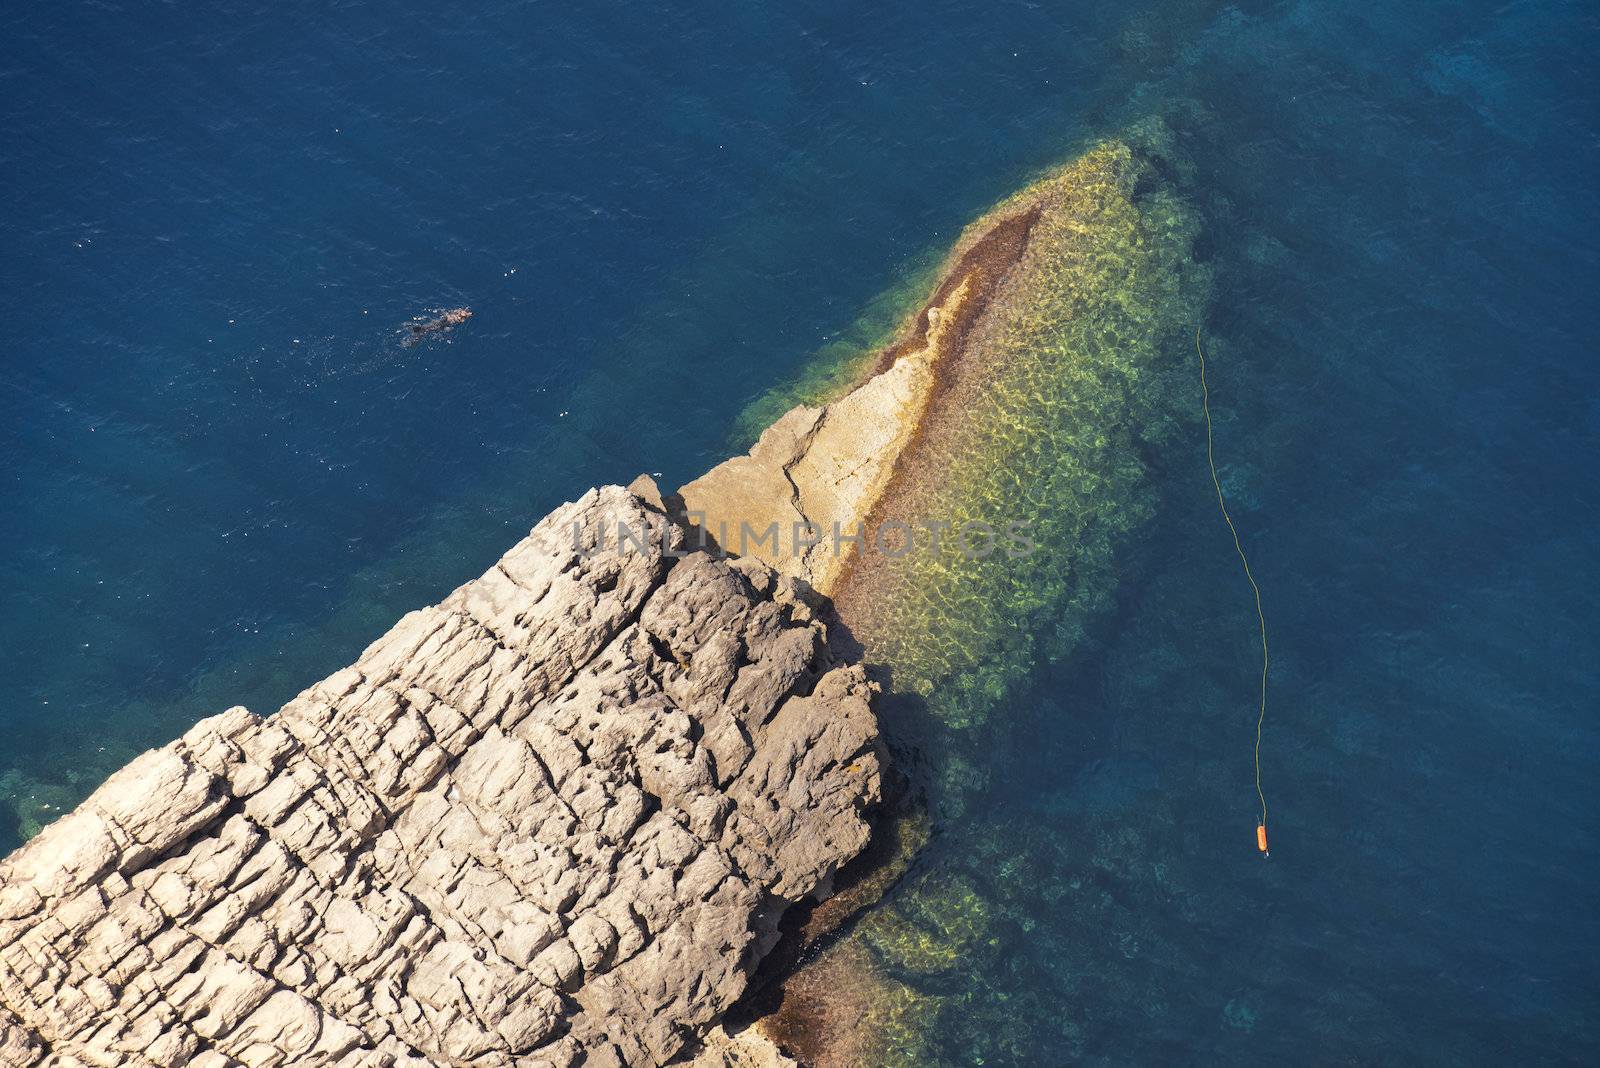 Lonely Diver in the Water by the Rocks of Cala Figuera in Mallorca, Spain ( Balearic Islands )